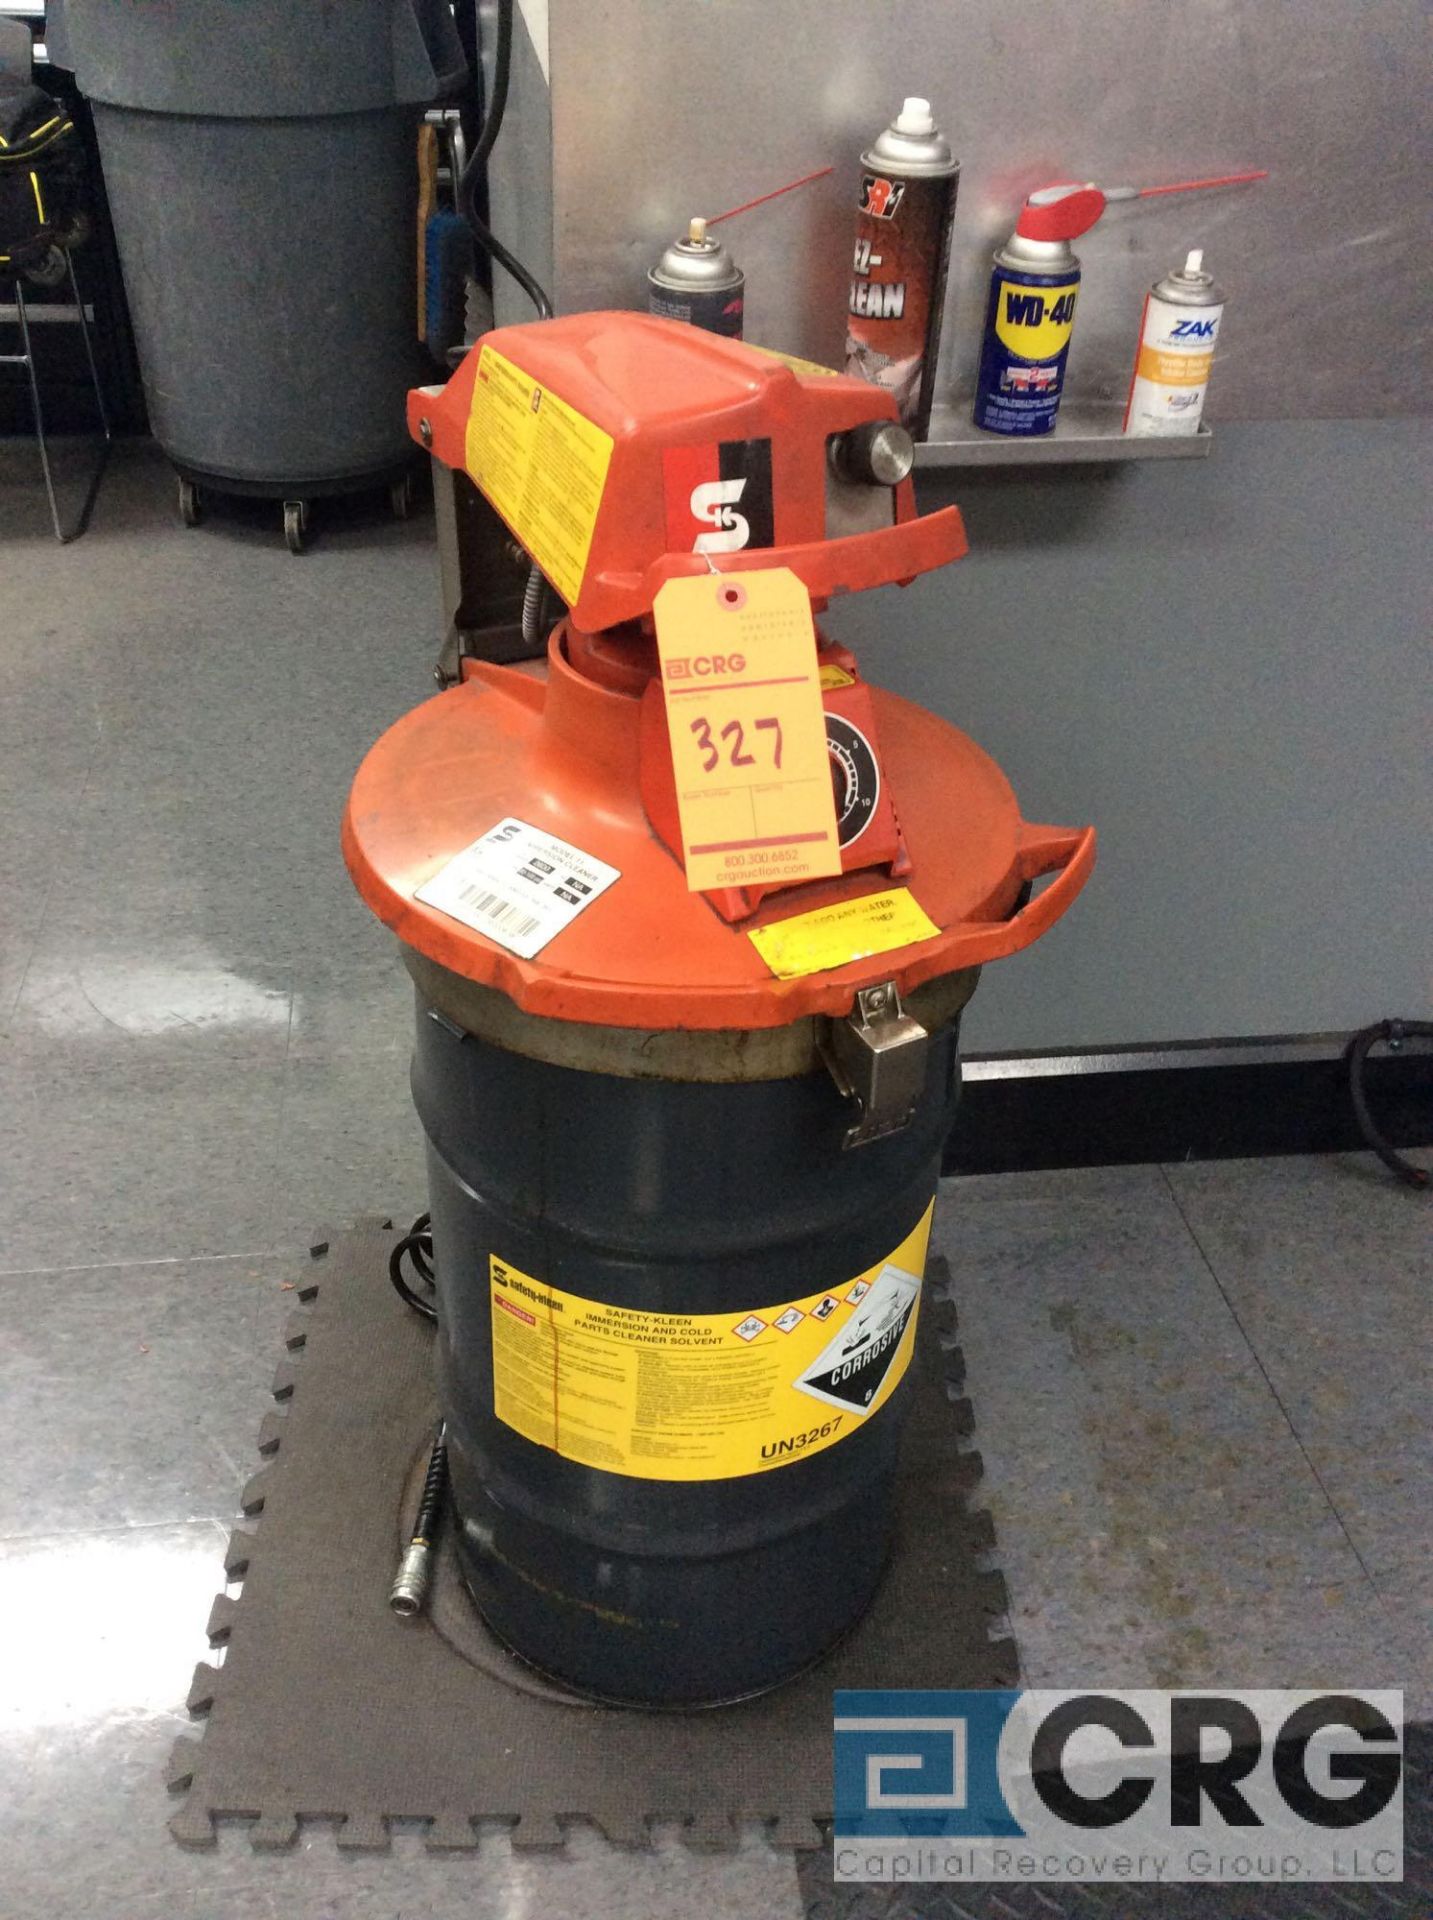 Safety Kleen Immersion and cold parts cleaner, mn 11 (LOCATED IN BLDG 1 CARB/INJECTION LAB)